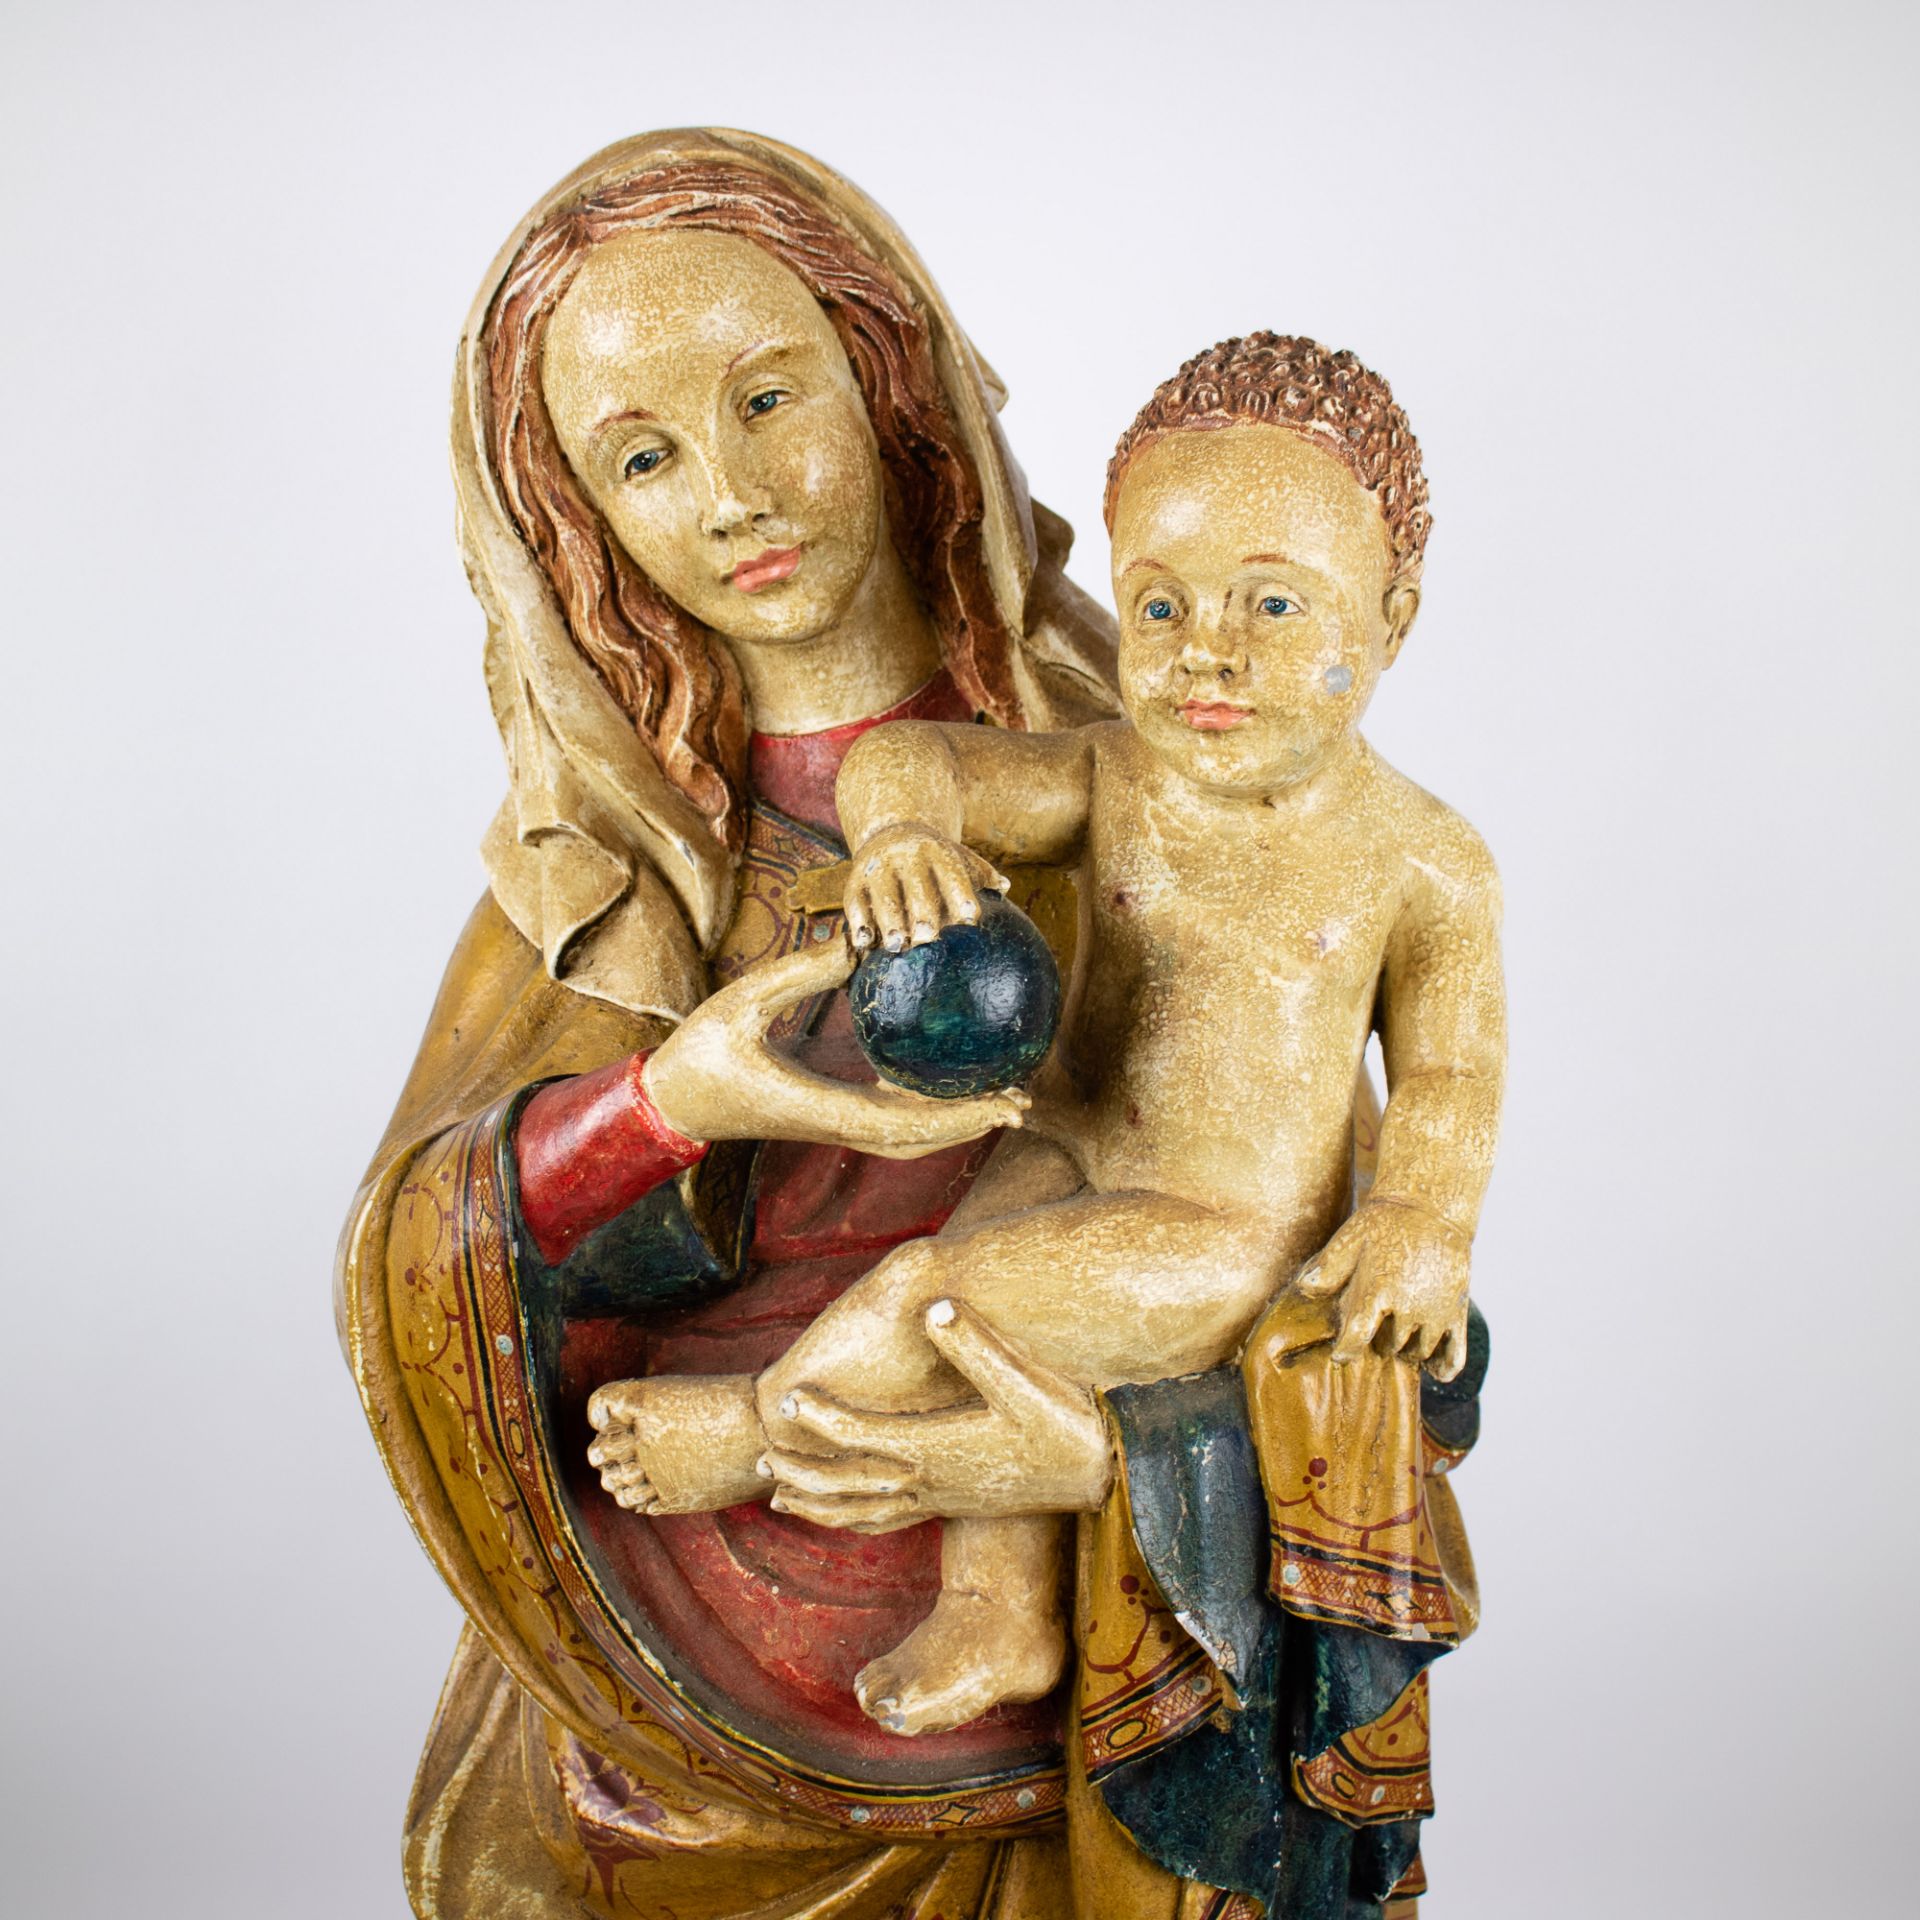 Polychrome wooden statue of Mary with child - Image 2 of 5